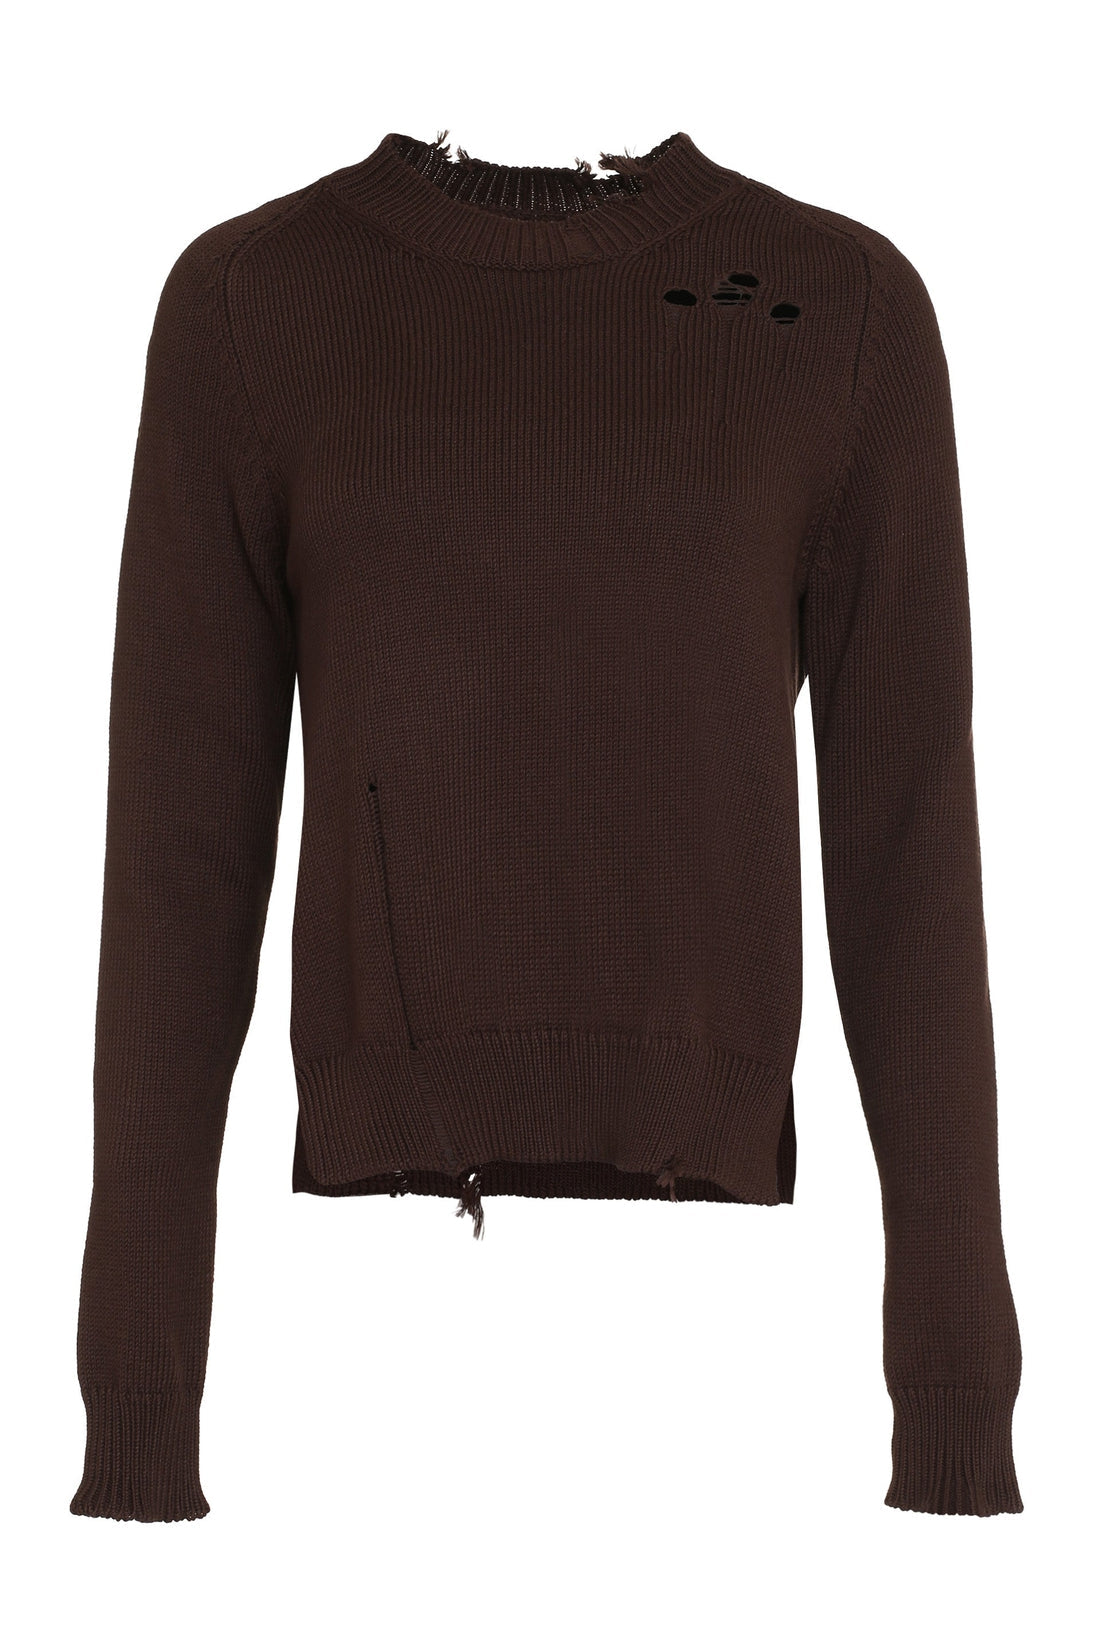 Maison Margiela-OUTLET-SALE-Ripped-detail knitted jumper-ARCHIVIST